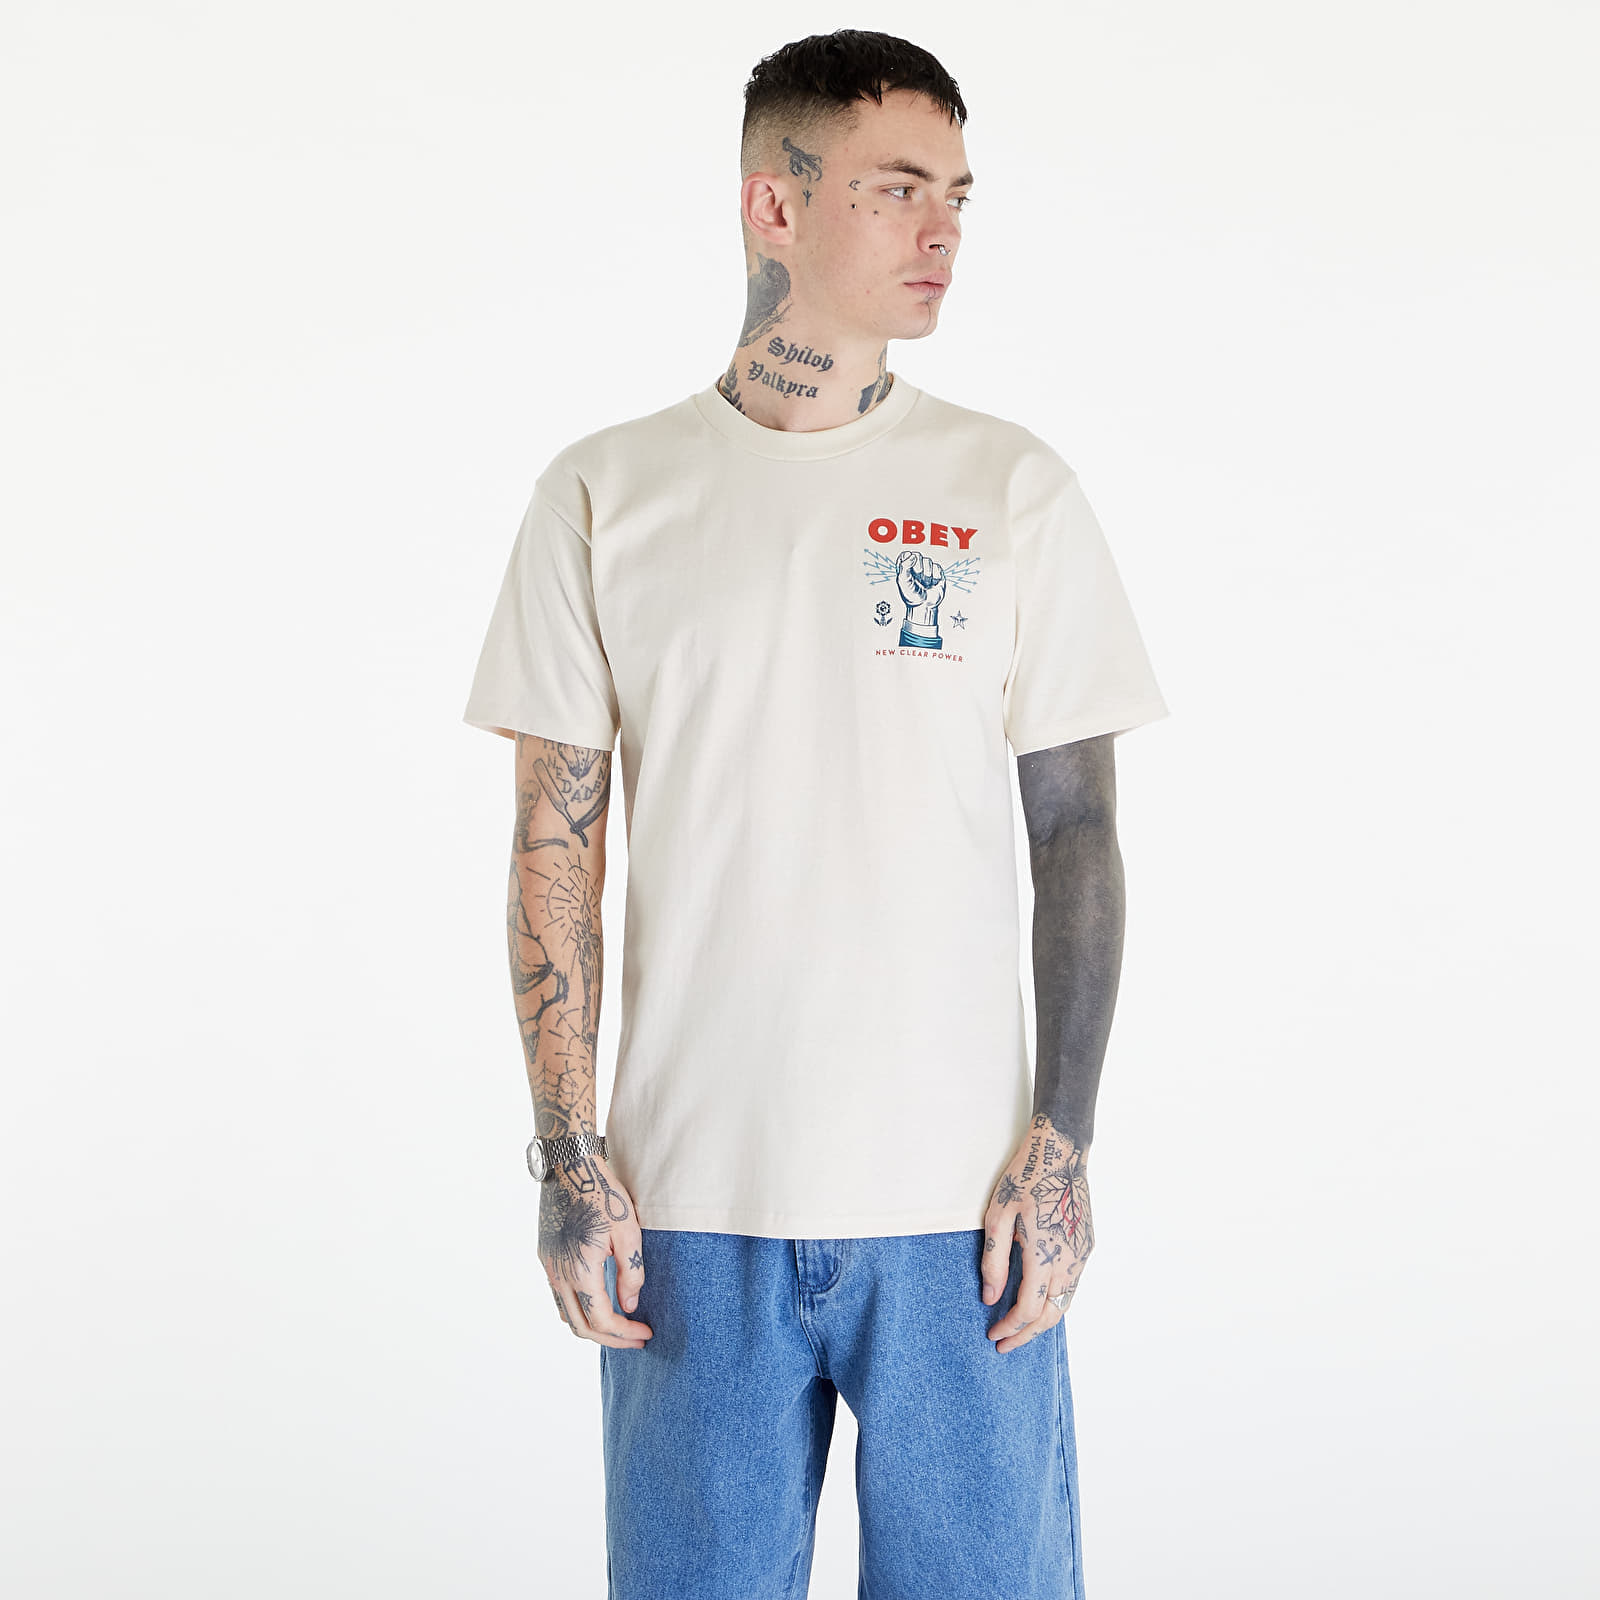 Obey - New Clear Power Cream - T-Shirt